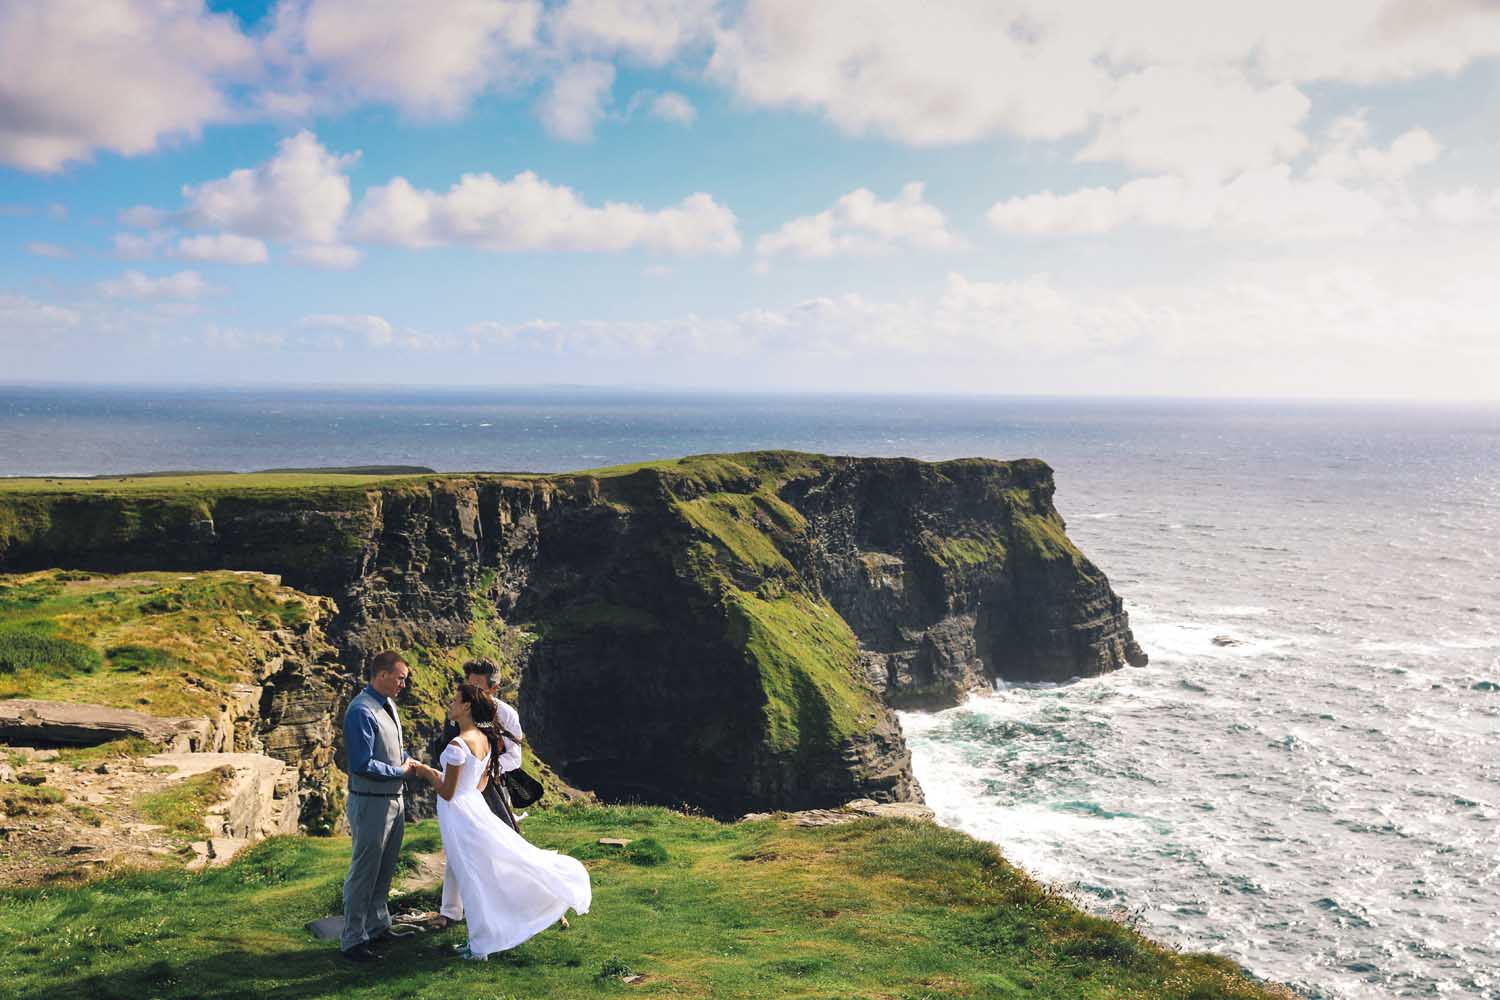 Couple exchanging vows at Hag's Head, Co. Clare